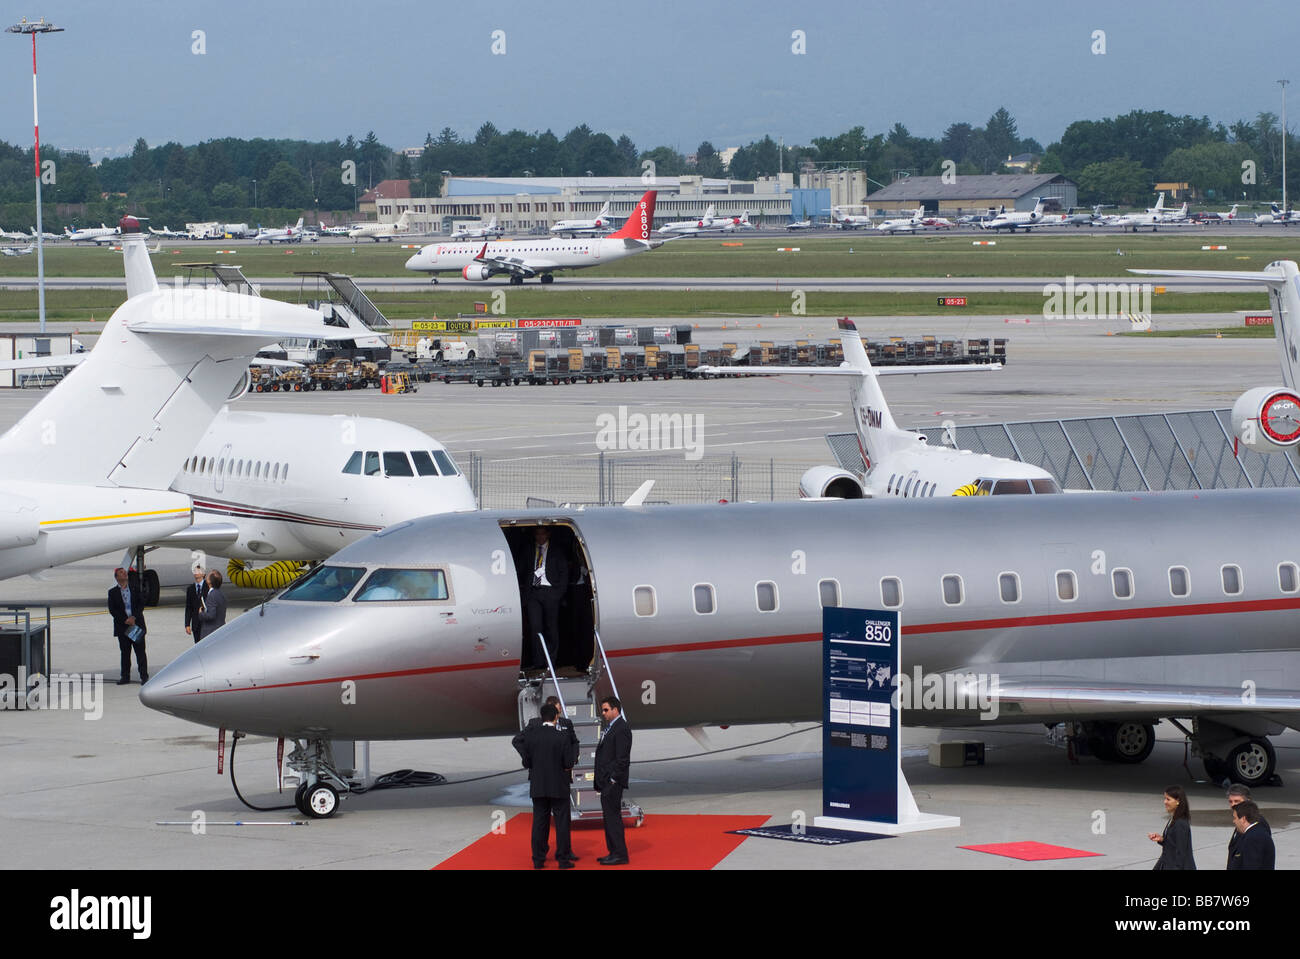 Executive Business Jets at EBACE Aircraft Trade Show at Geneva Airport Switzerland Geneve Suisse Stock Photo